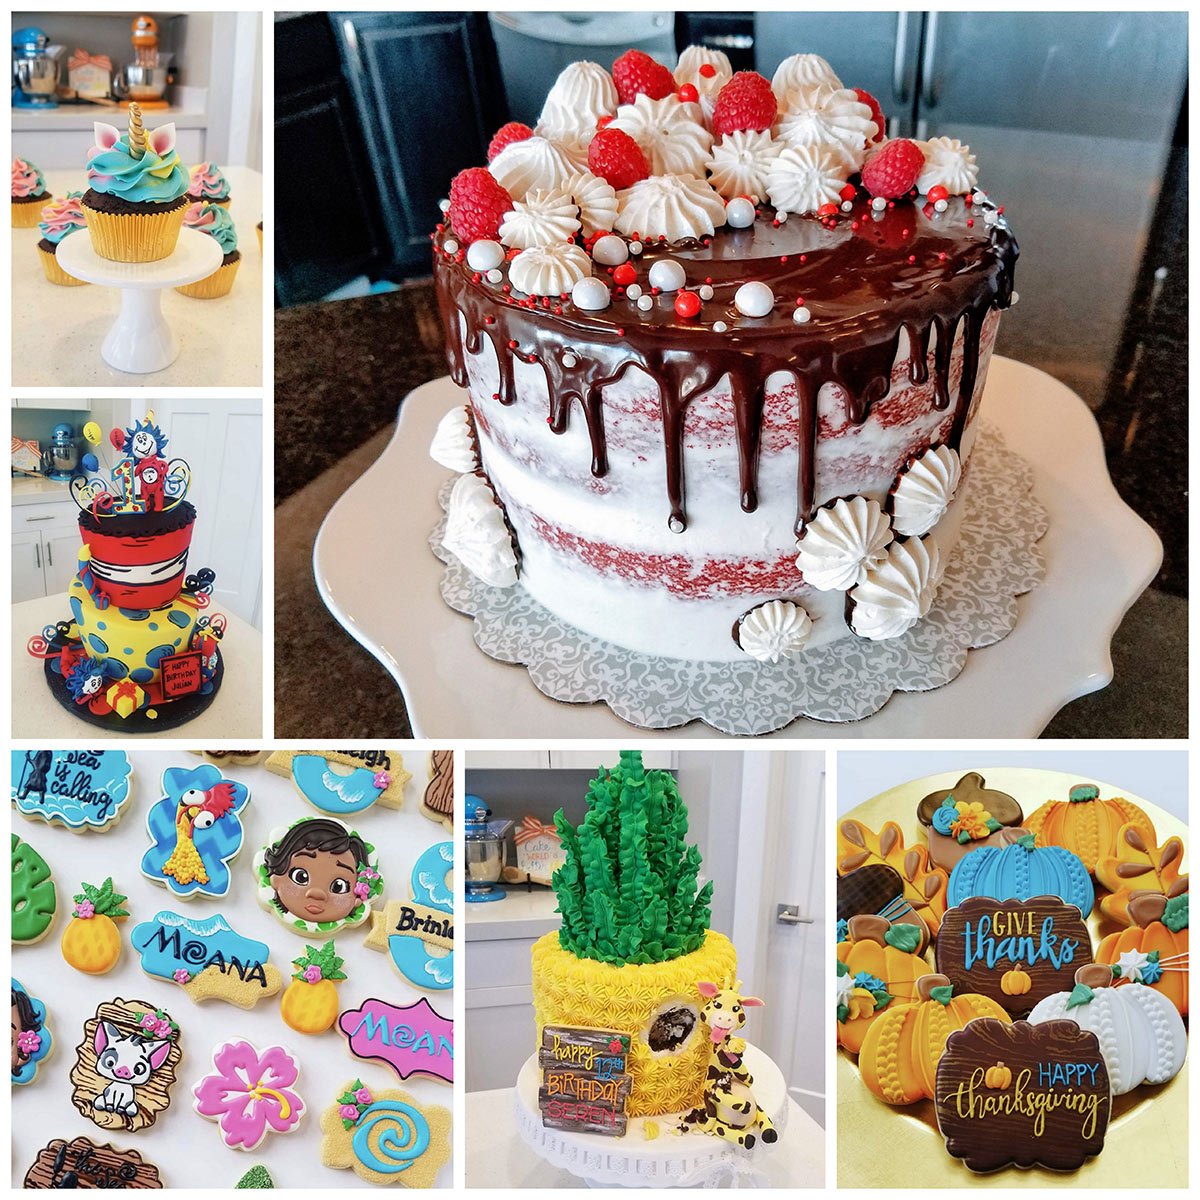 a collage of A Thing One and Thing Two layer cake, Moana cookies, Thanksgiving sugar cookies,